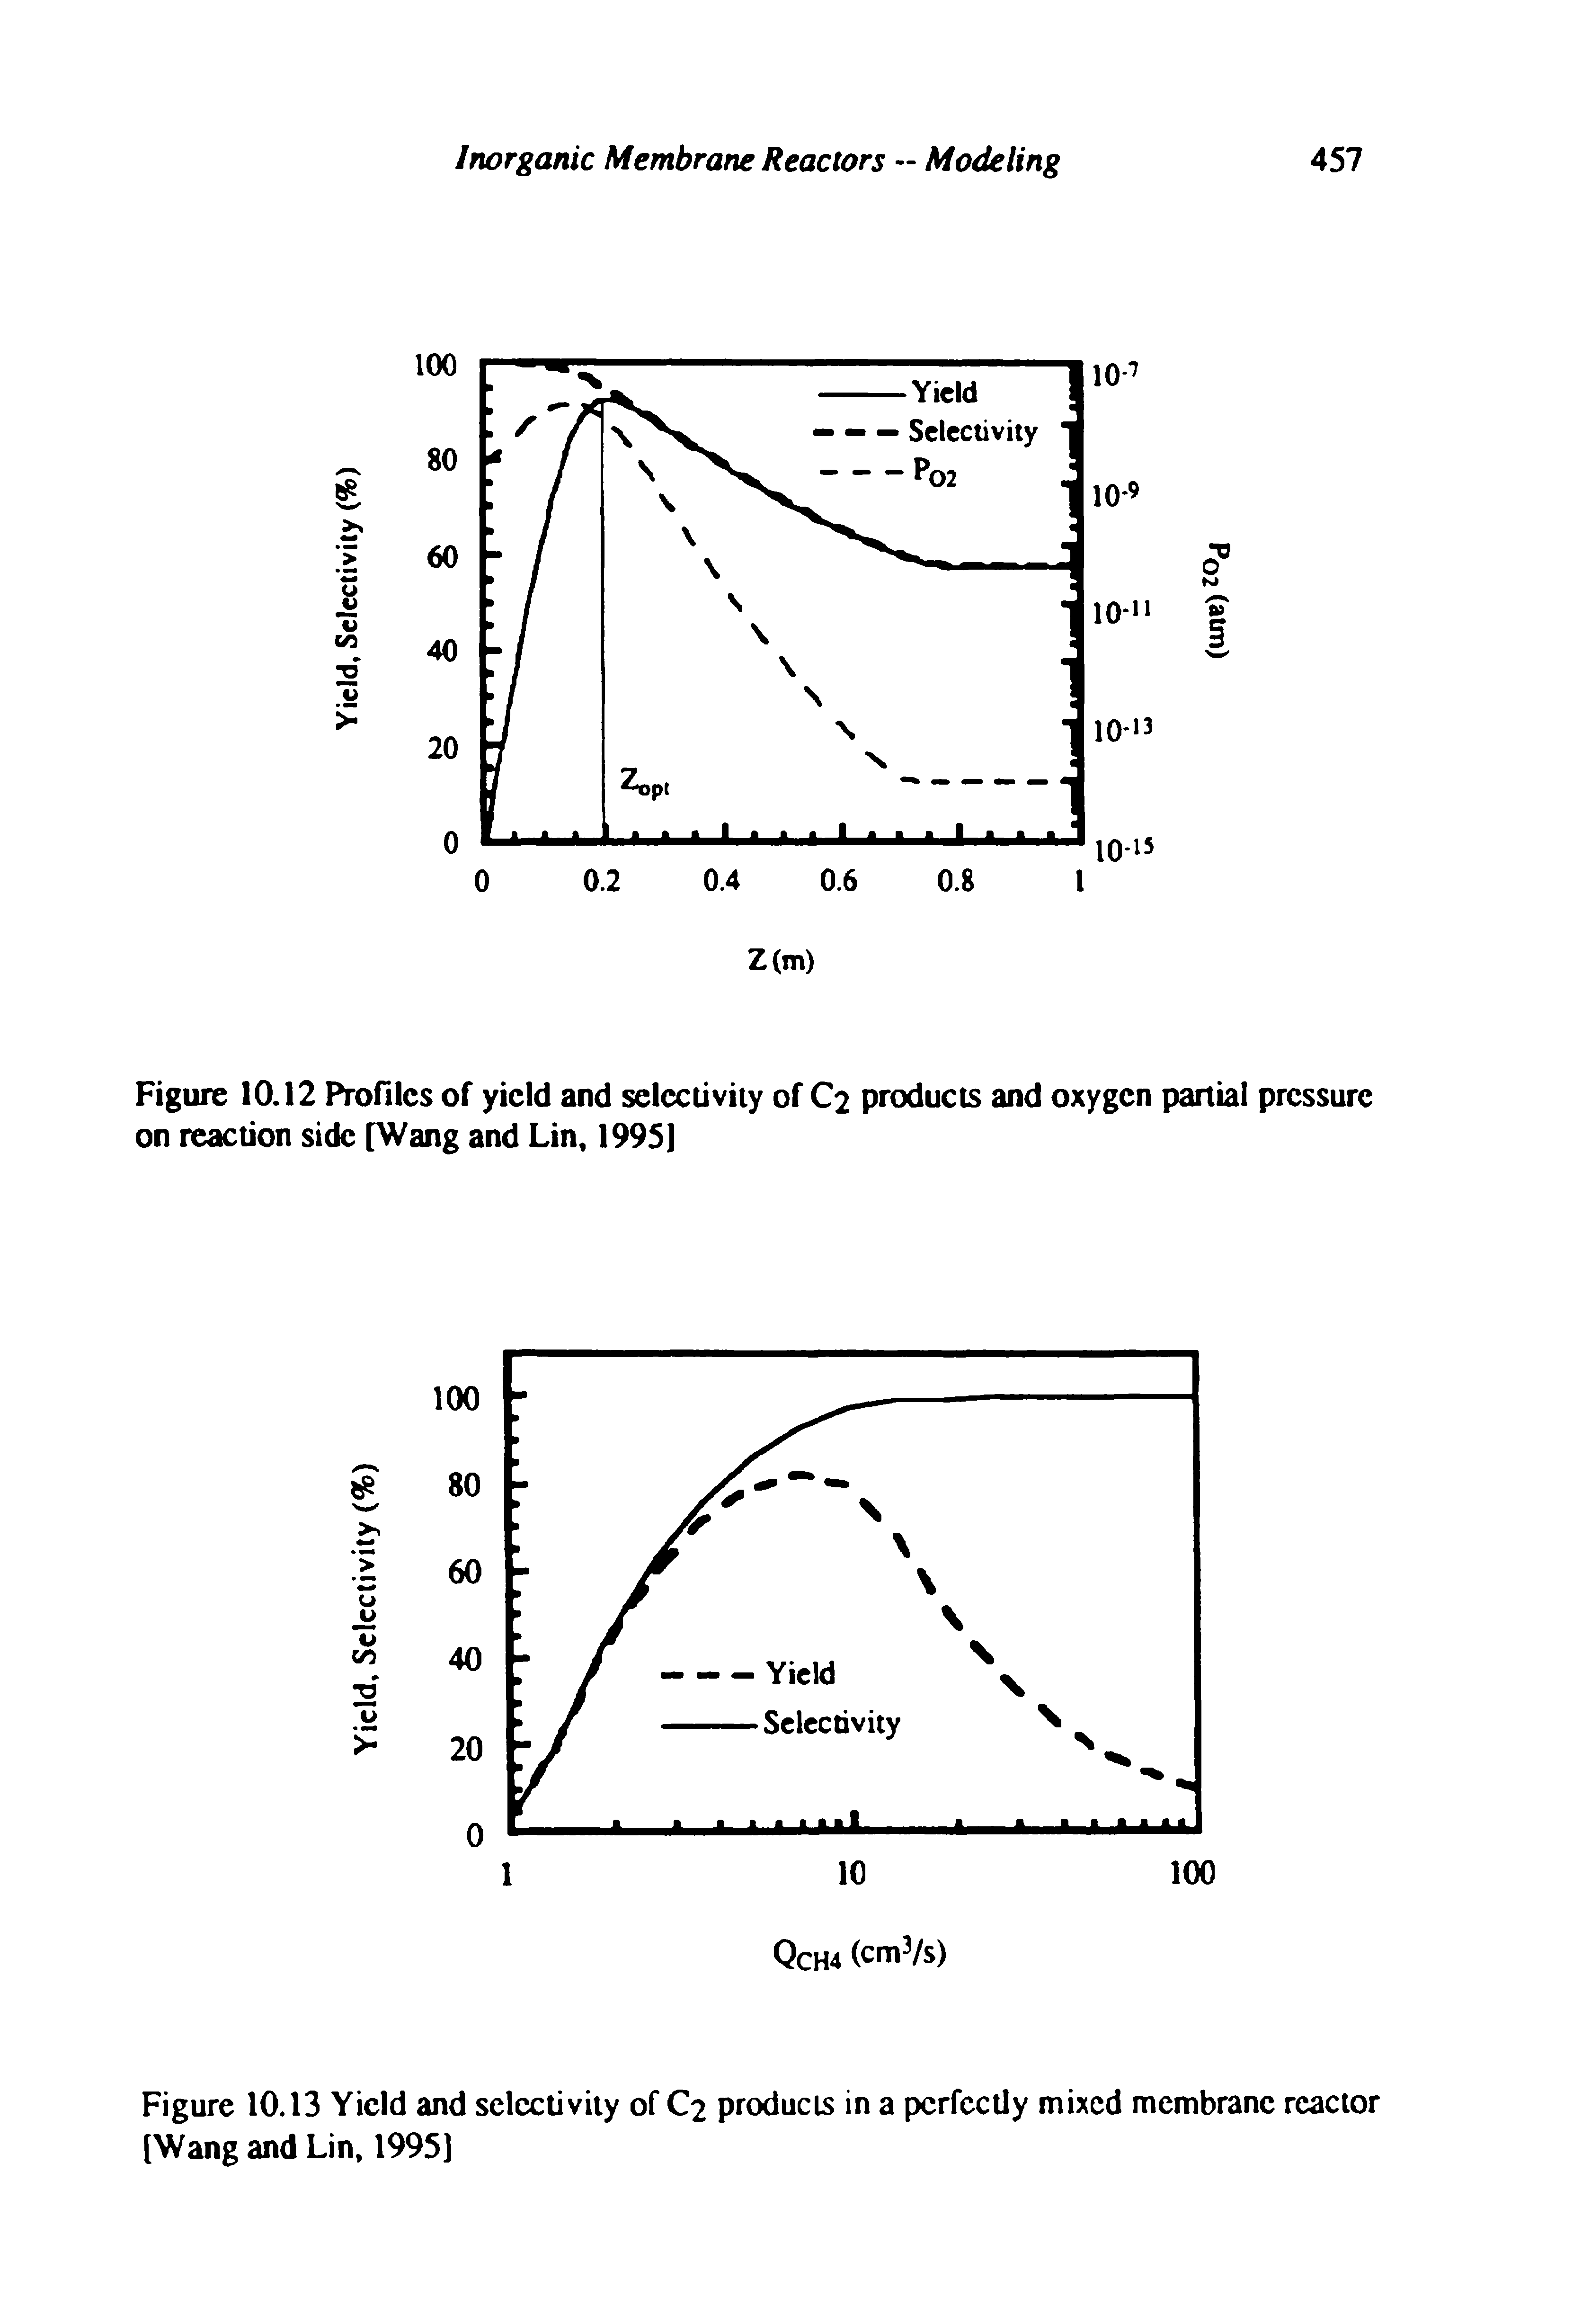 Figure 10.13 Yield and selectivity of C2 products in a perfectly mixed membrane reactor [Wang and Lin, 1995)...